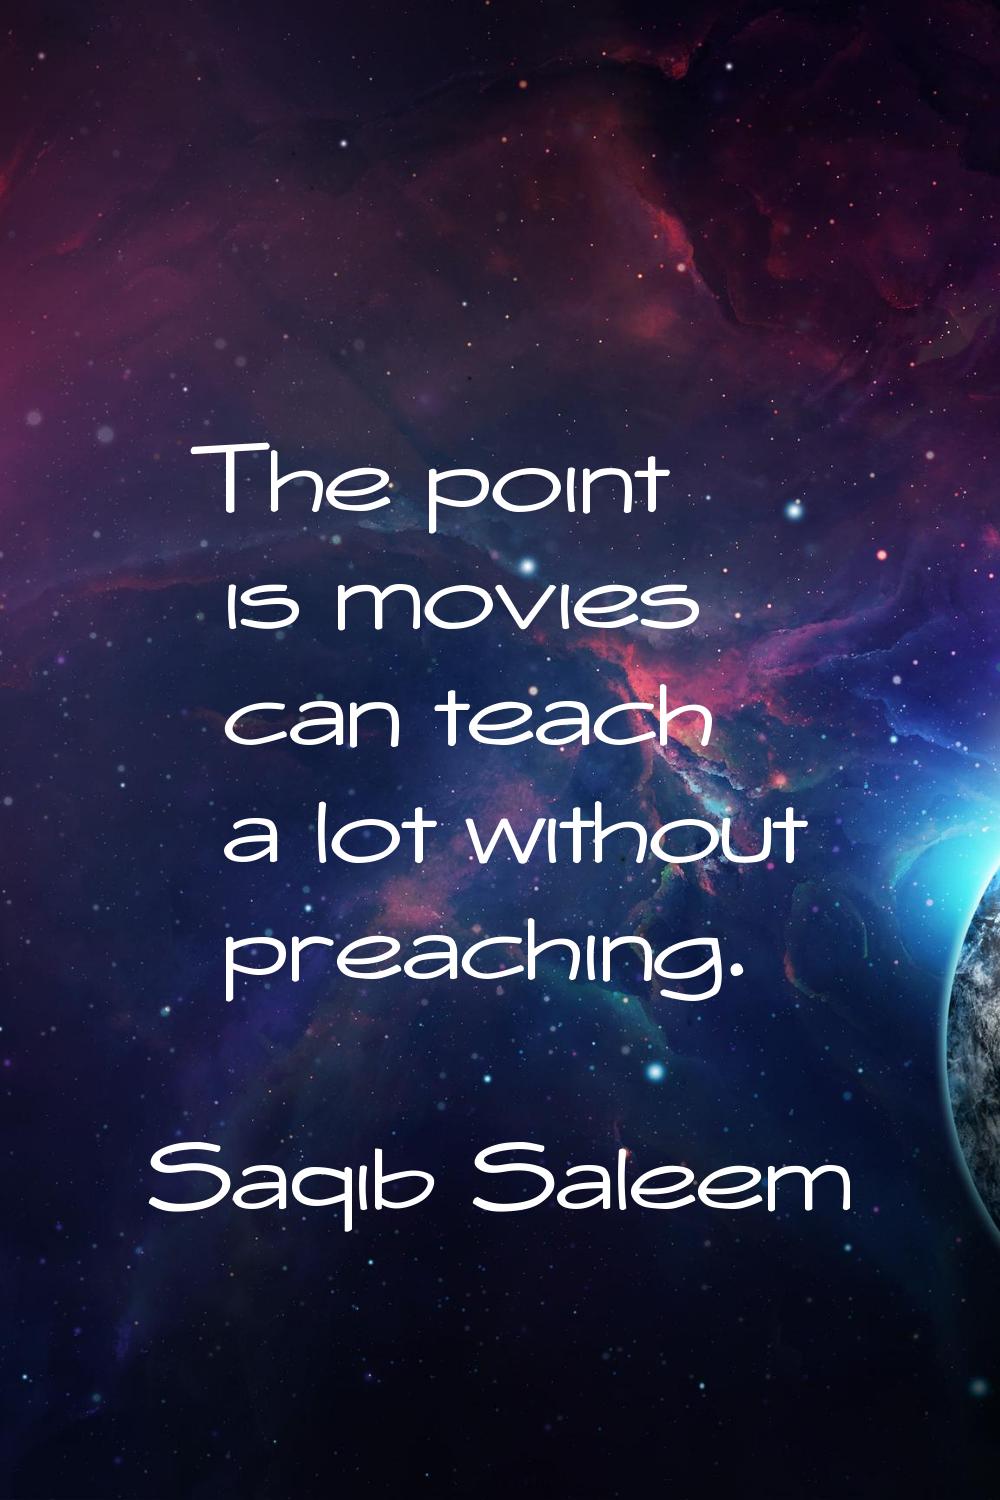 The point is movies can teach a lot without preaching.